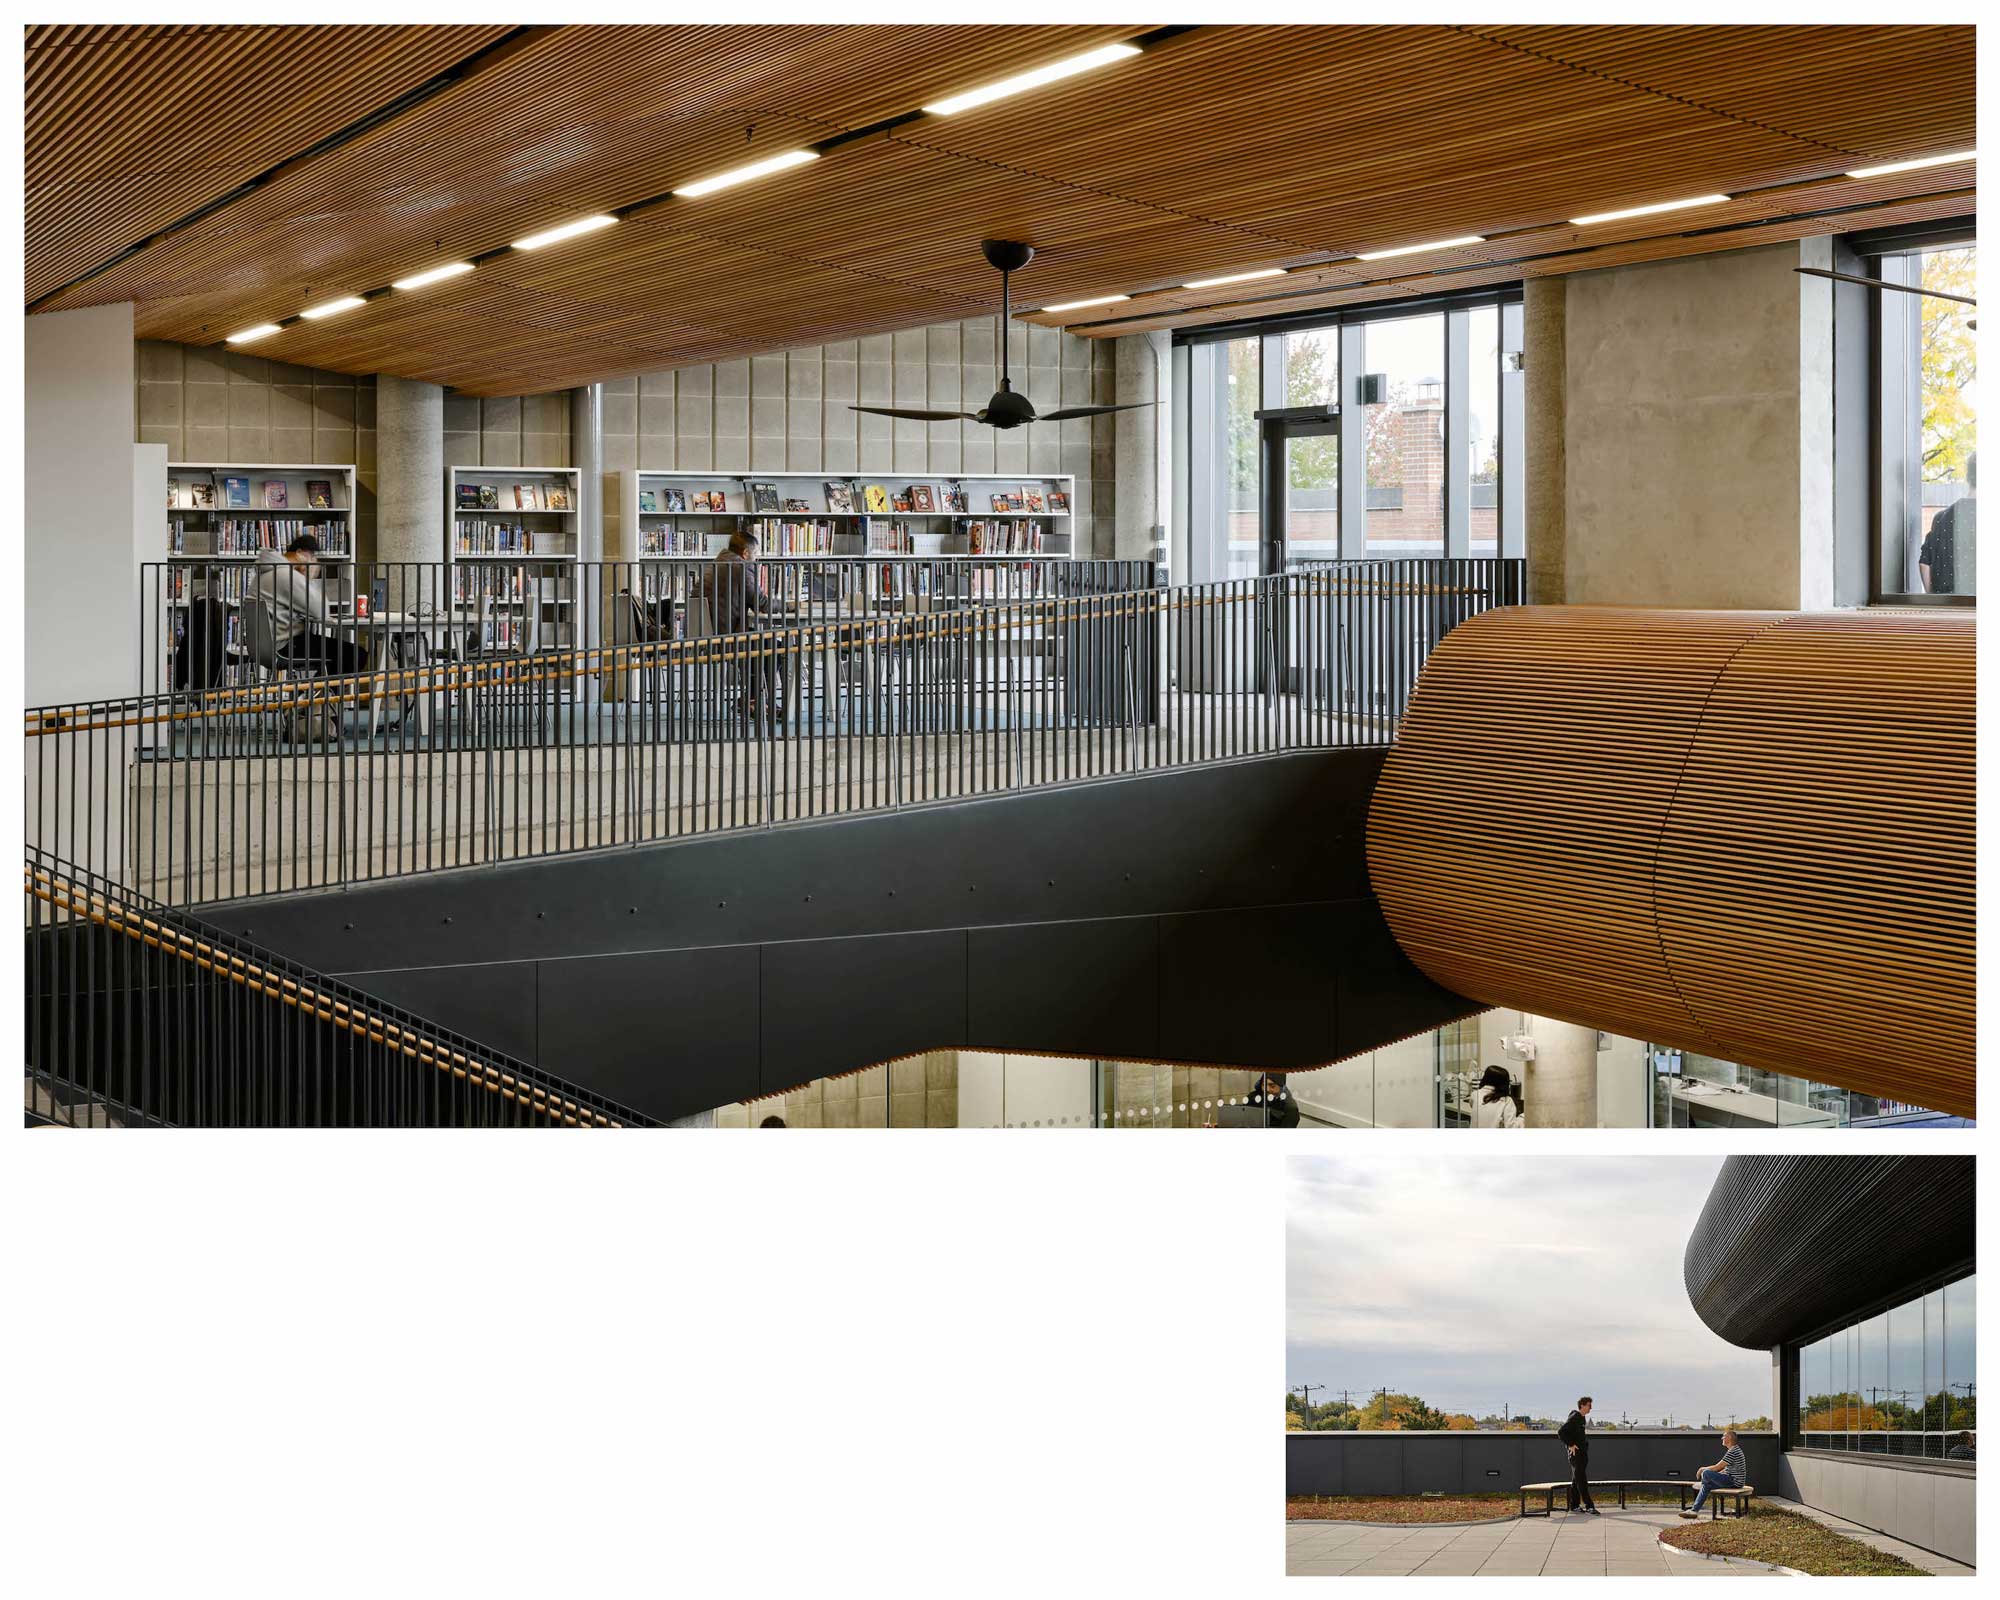 Interiour view of library space and image of outdoor terrace bellow